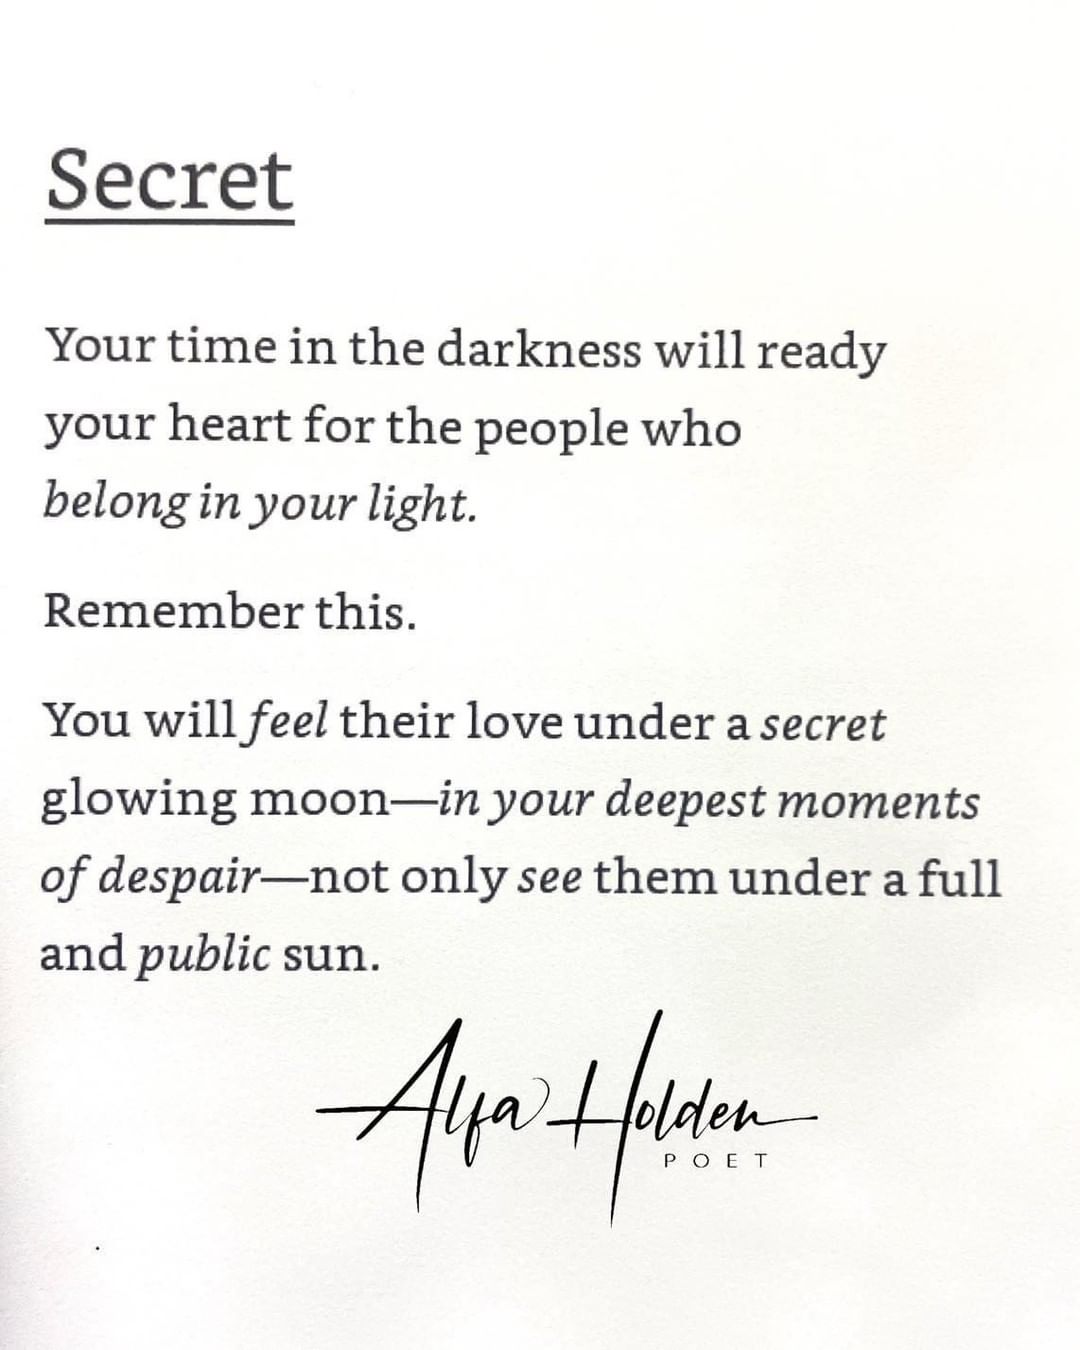 Secret. Your time in the darkness will ready your heart for the people who belong in your light. Remember this. You will feel their love under a secret glowing moon—in your deepest moments of despair—not only see them under a full and public sun.